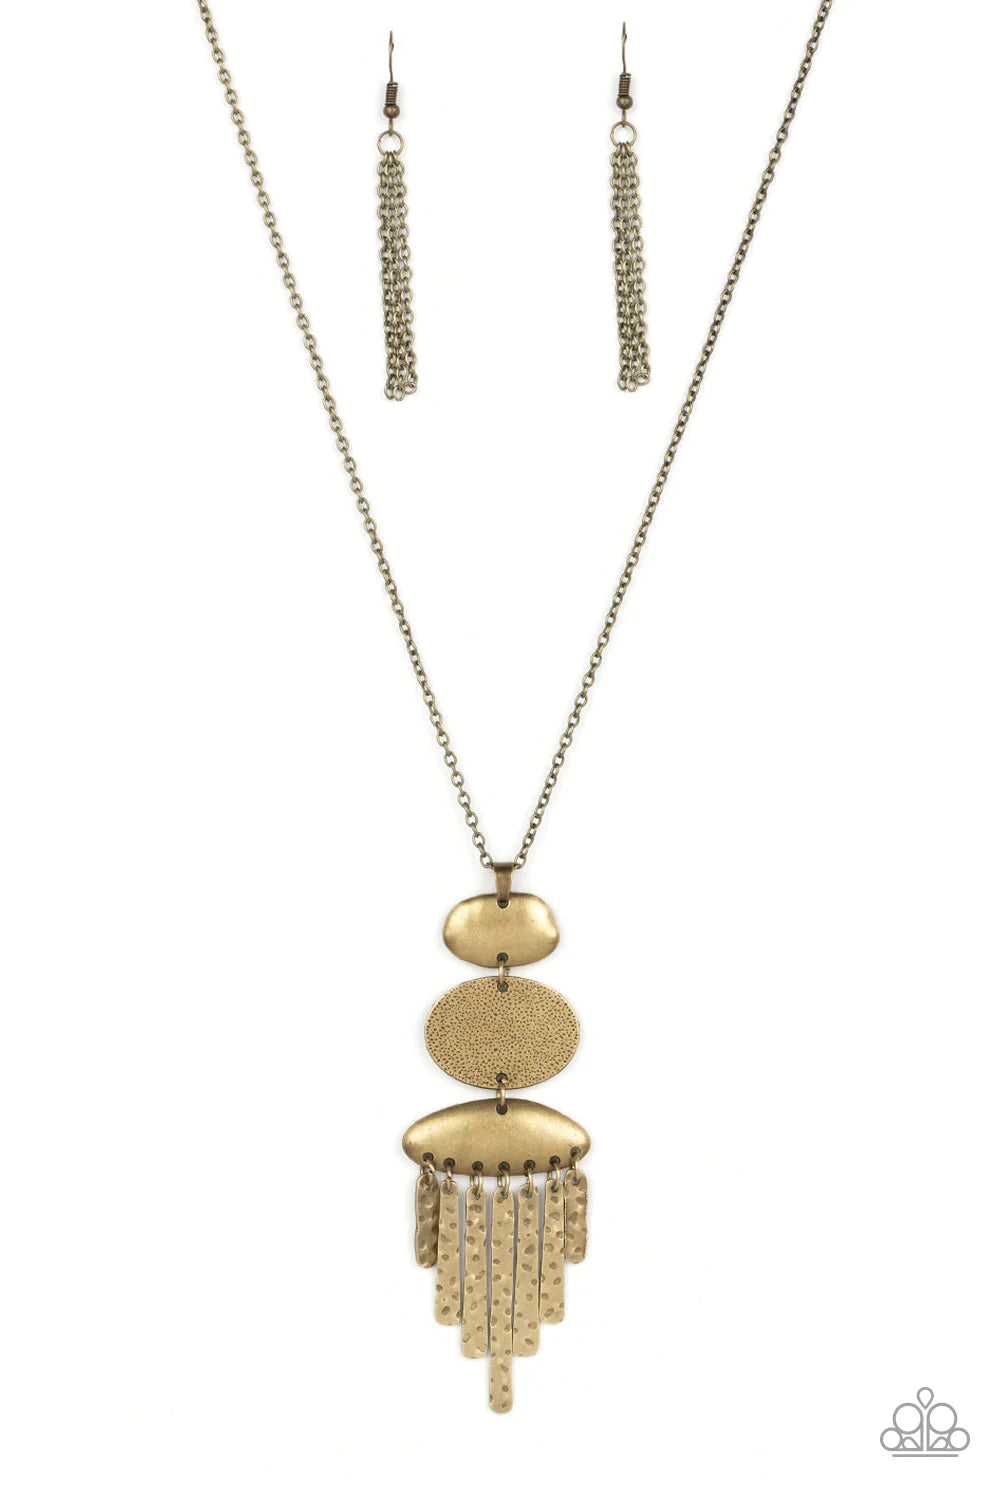 Paparazzi Necklace - After the ARTIFACT - Brass